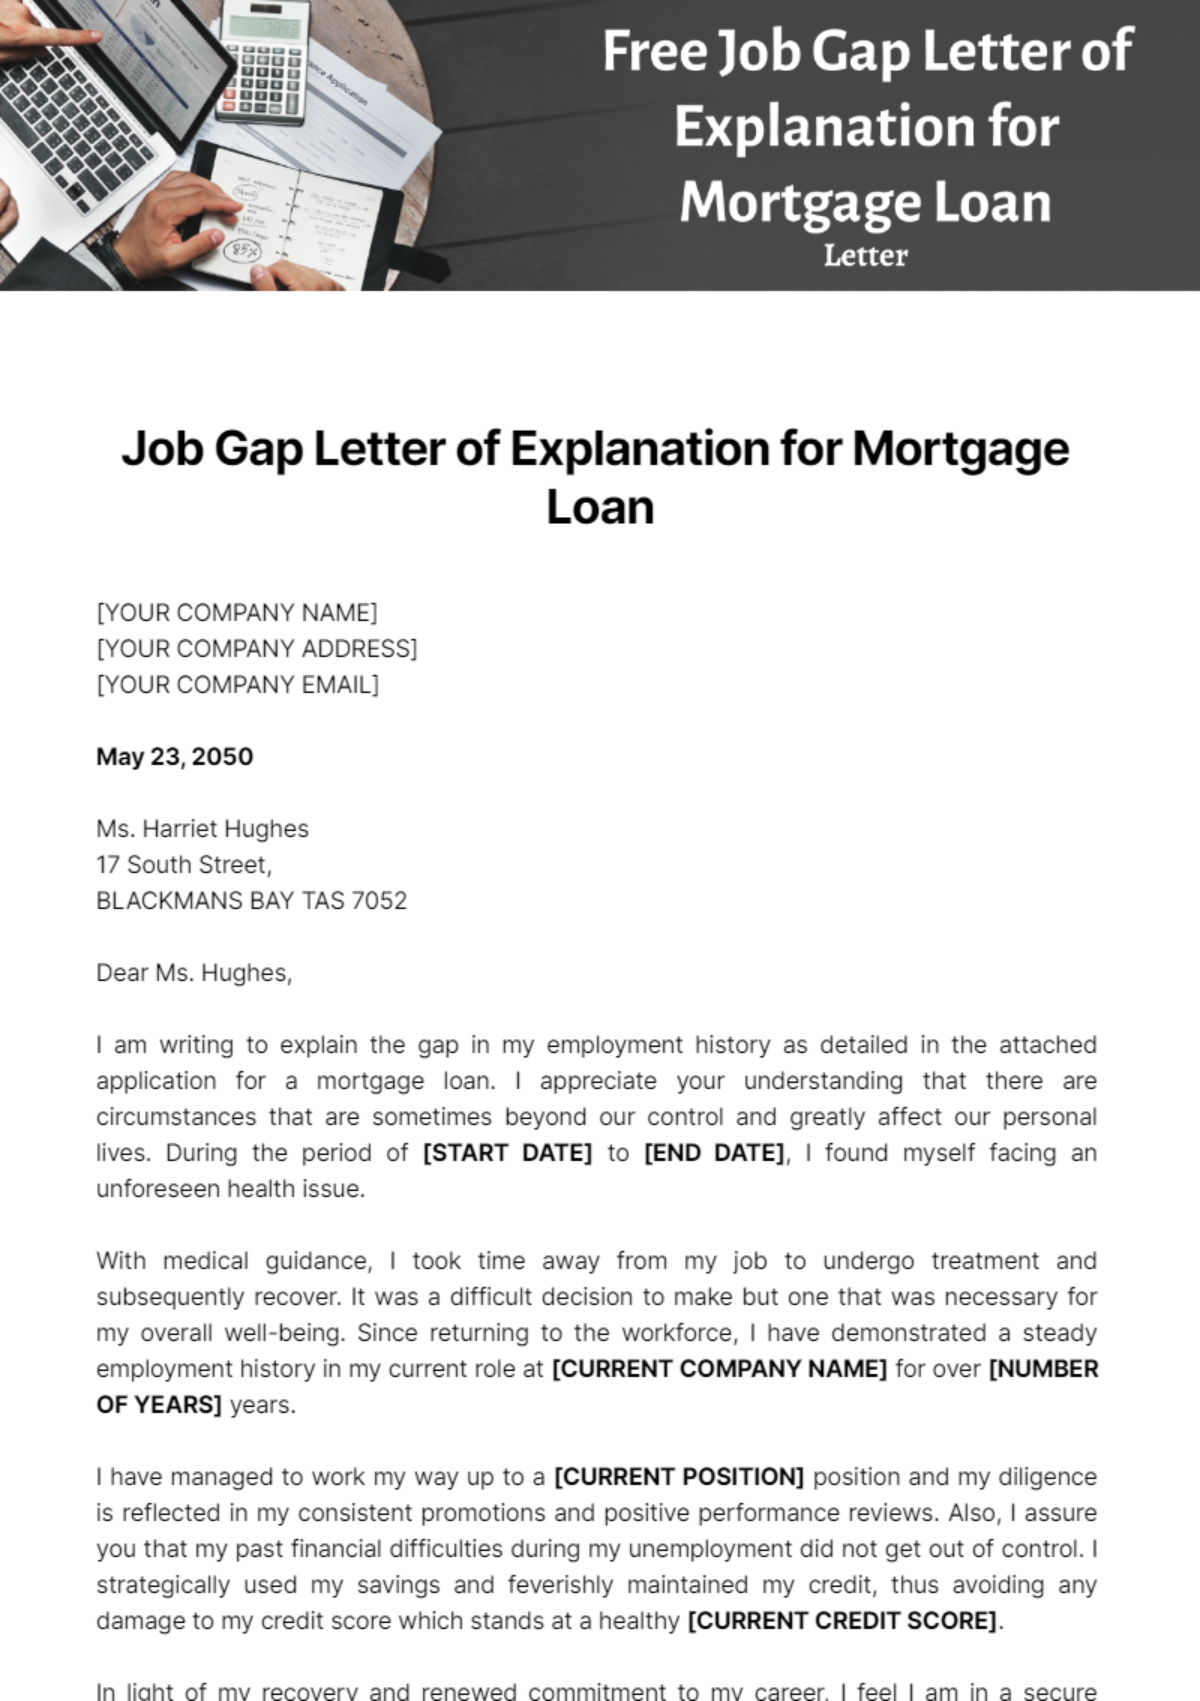 Job Gap Letter of Explanation for Mortgage Loan Template